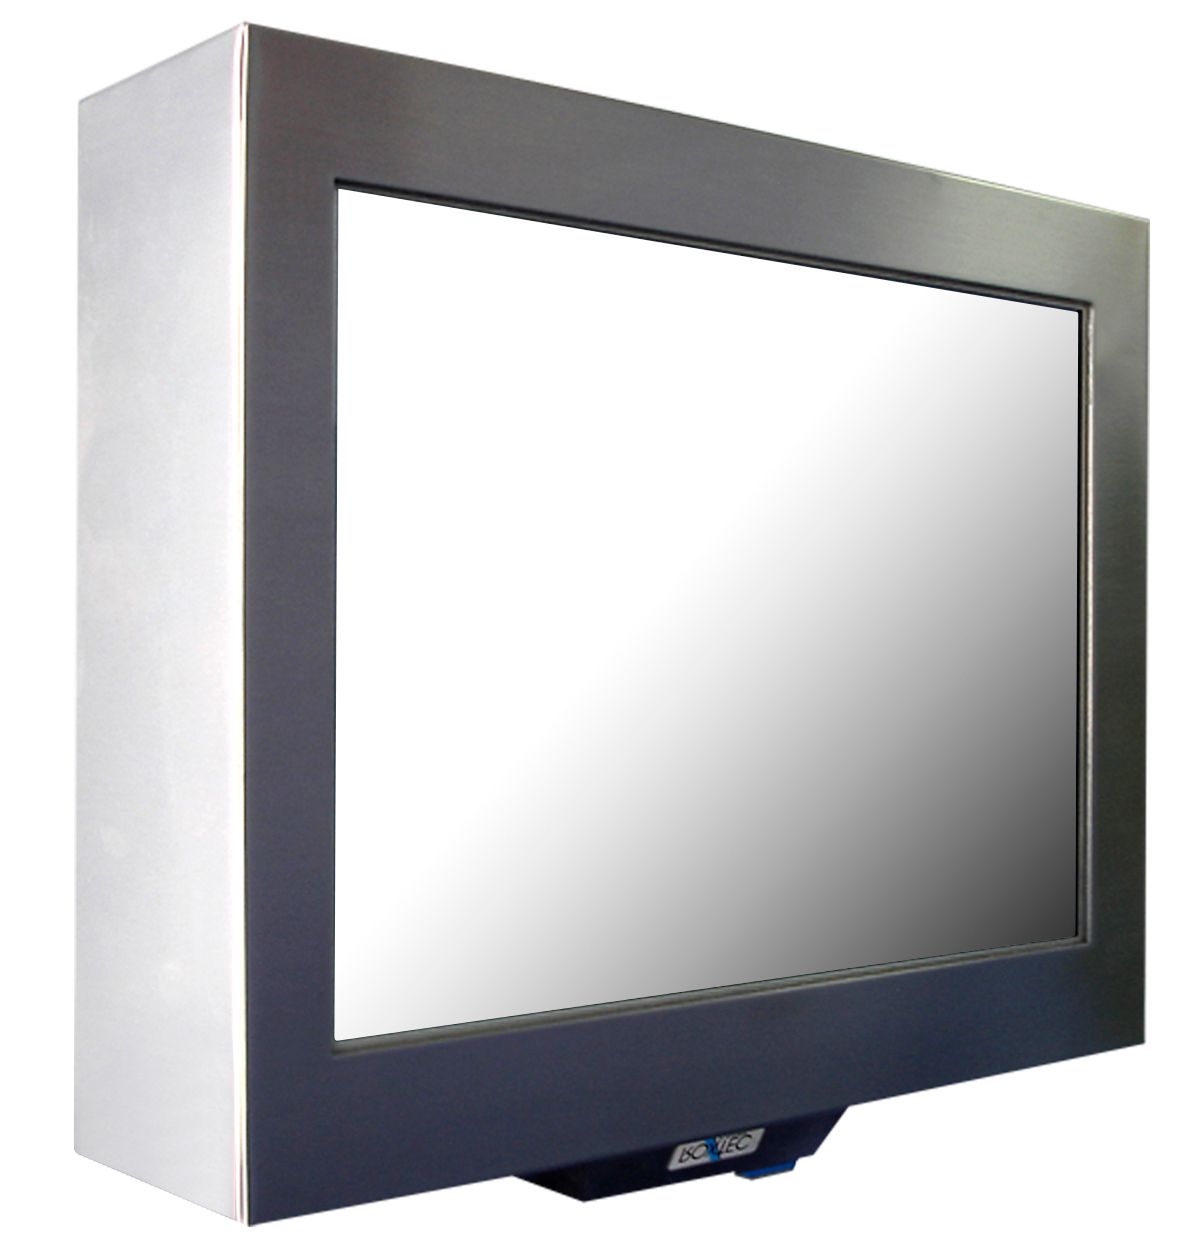 A ruggedised screen with a stainless steel frame on a white background